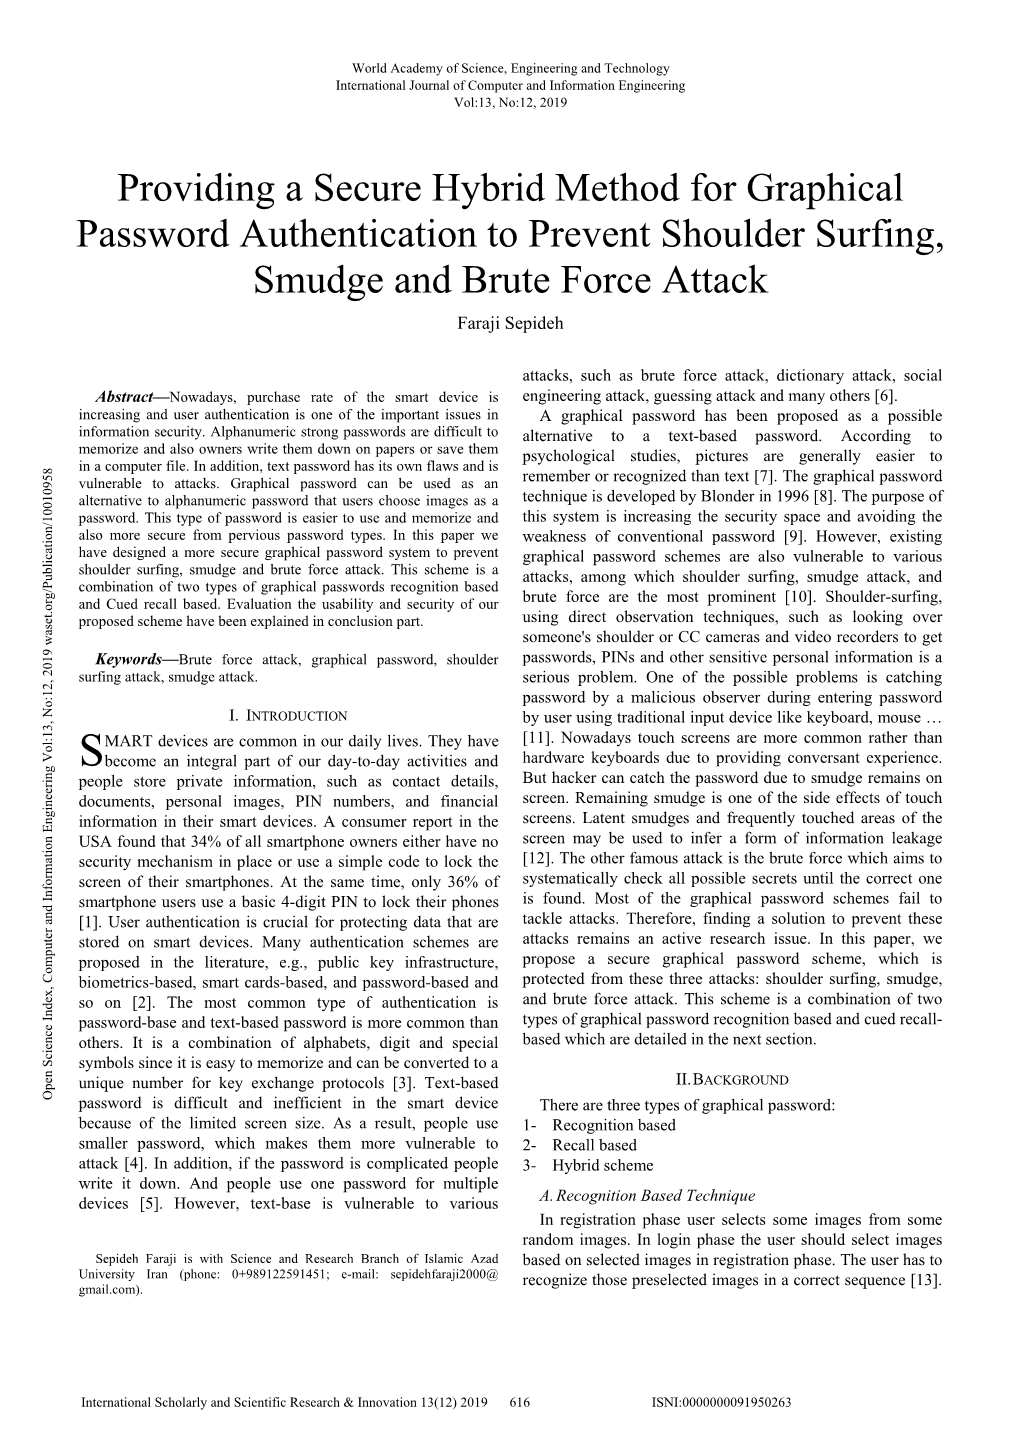 Providing a Secure Hybrid Method for Graphical Password Authentication to Prevent Shoulder Surfing, Smudge and Brute Force Attack Faraji Sepideh